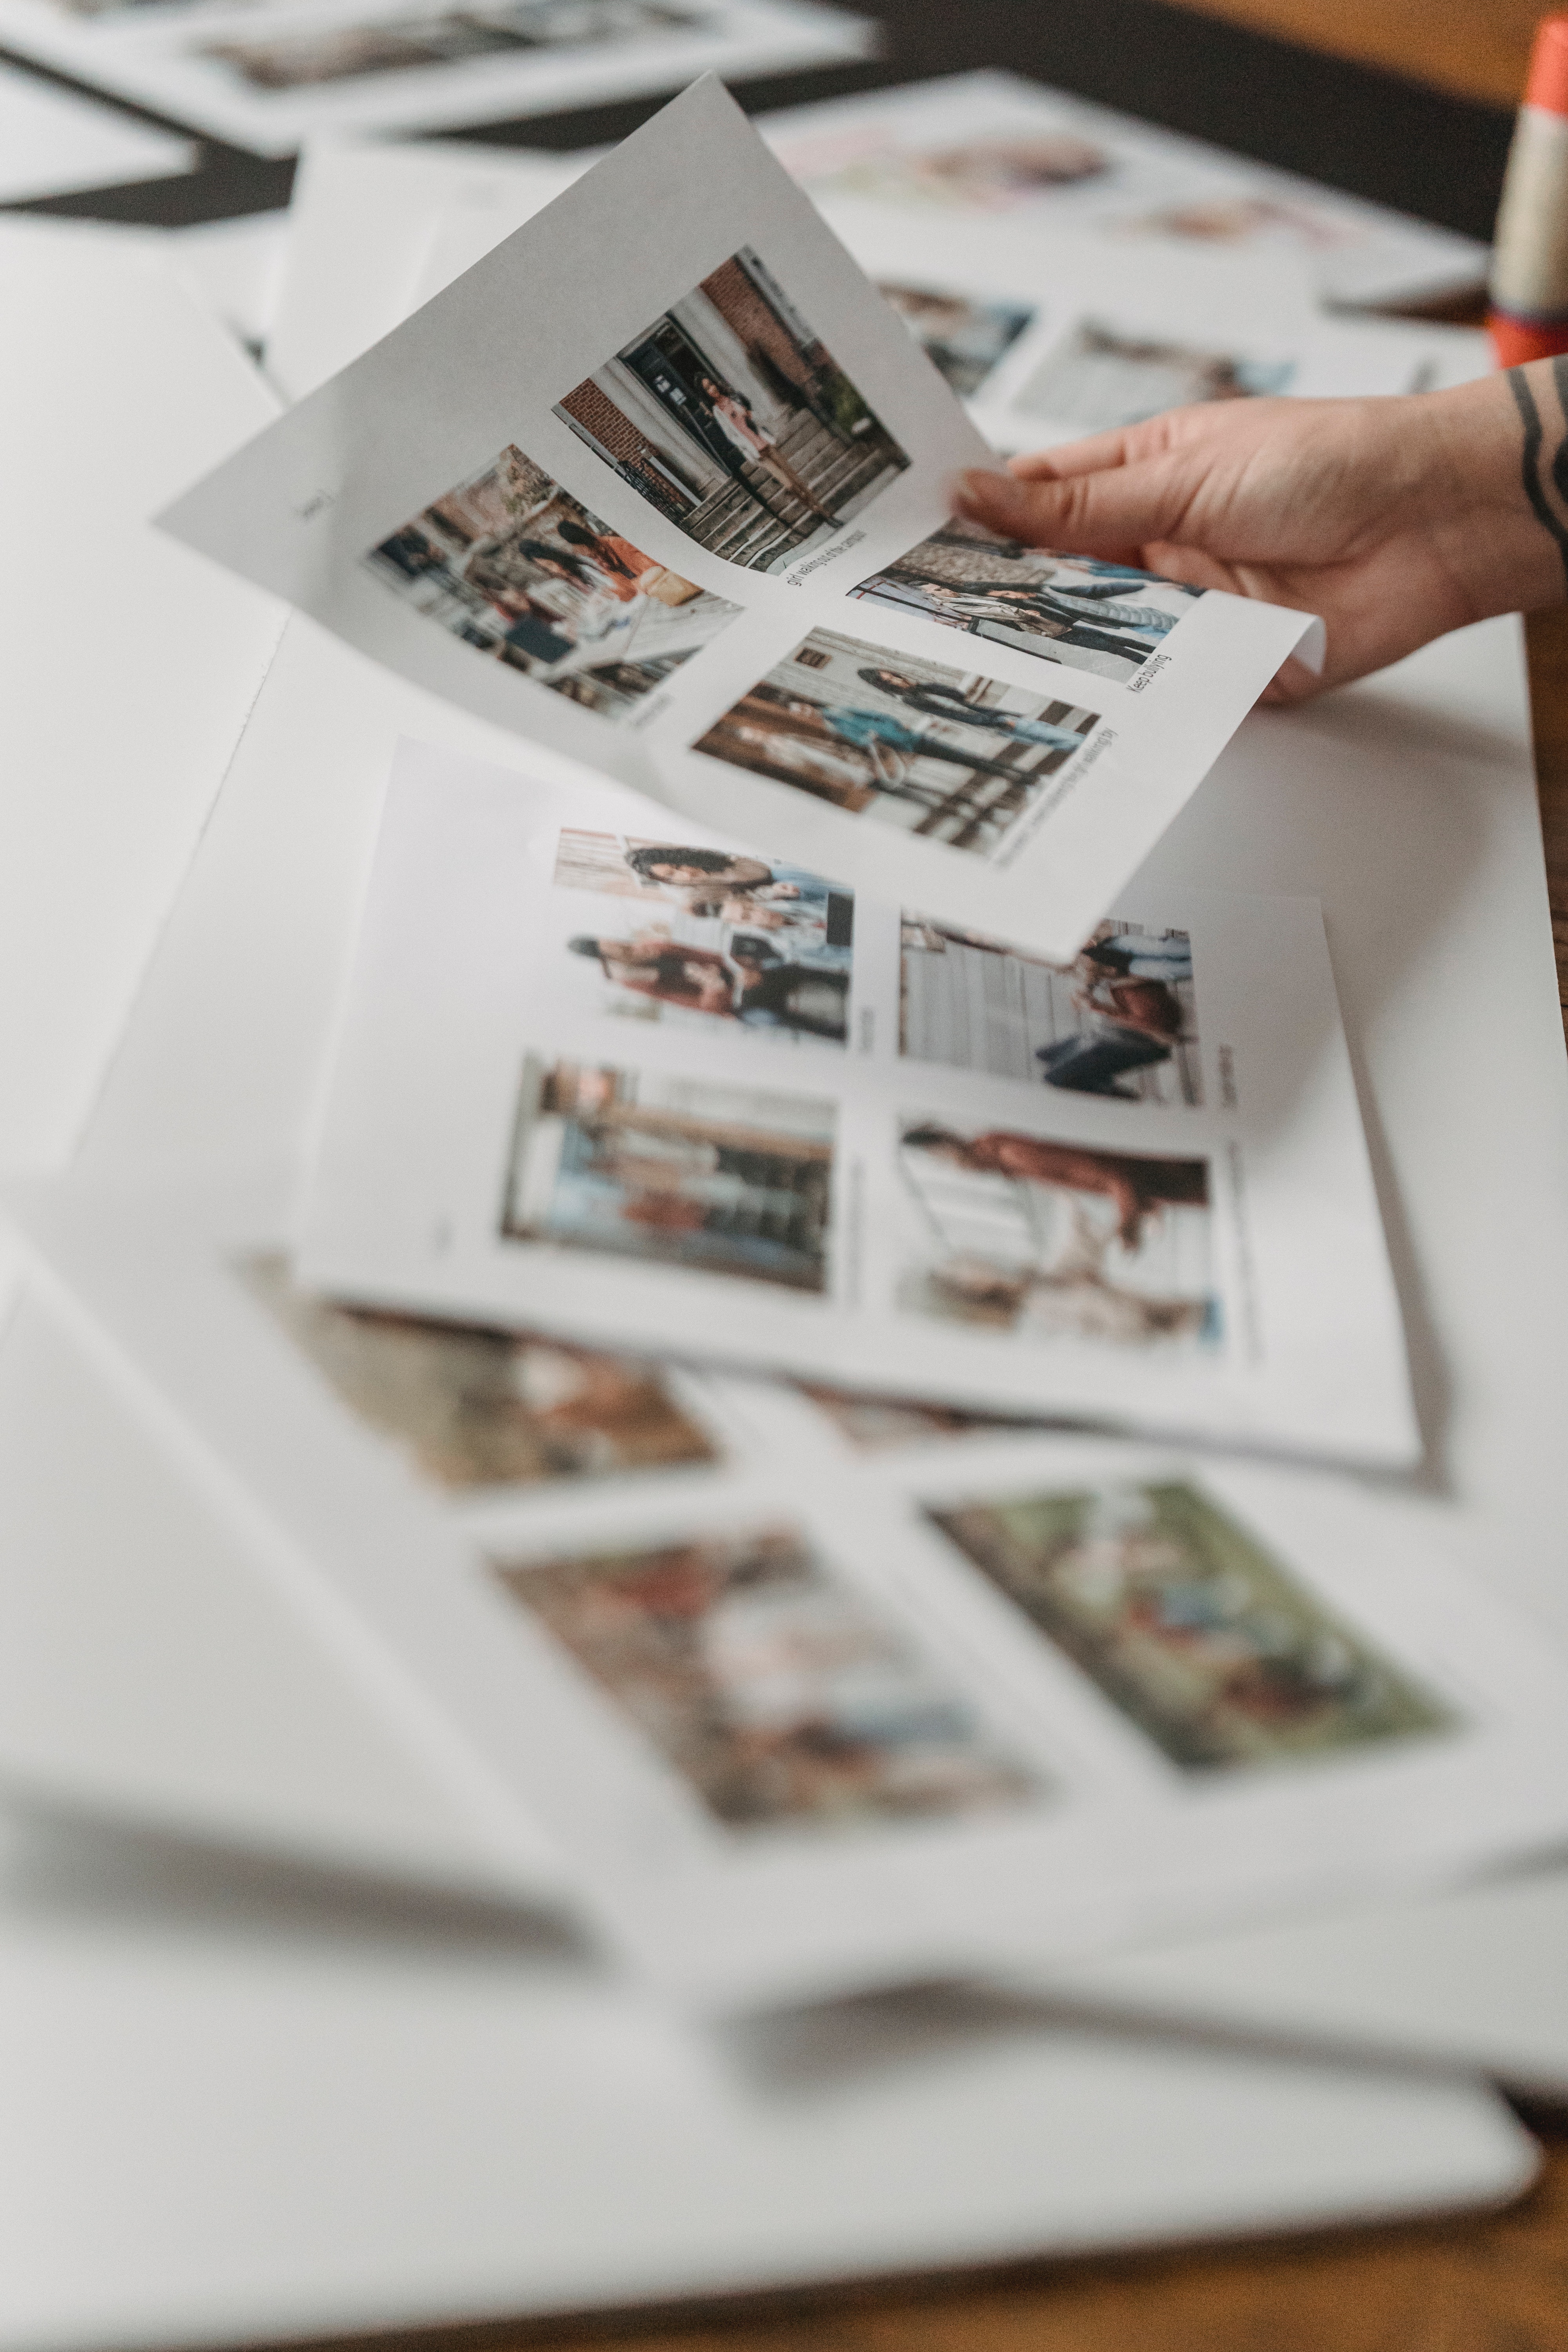 The woman stumbled upon some photos. | Source: Pexels